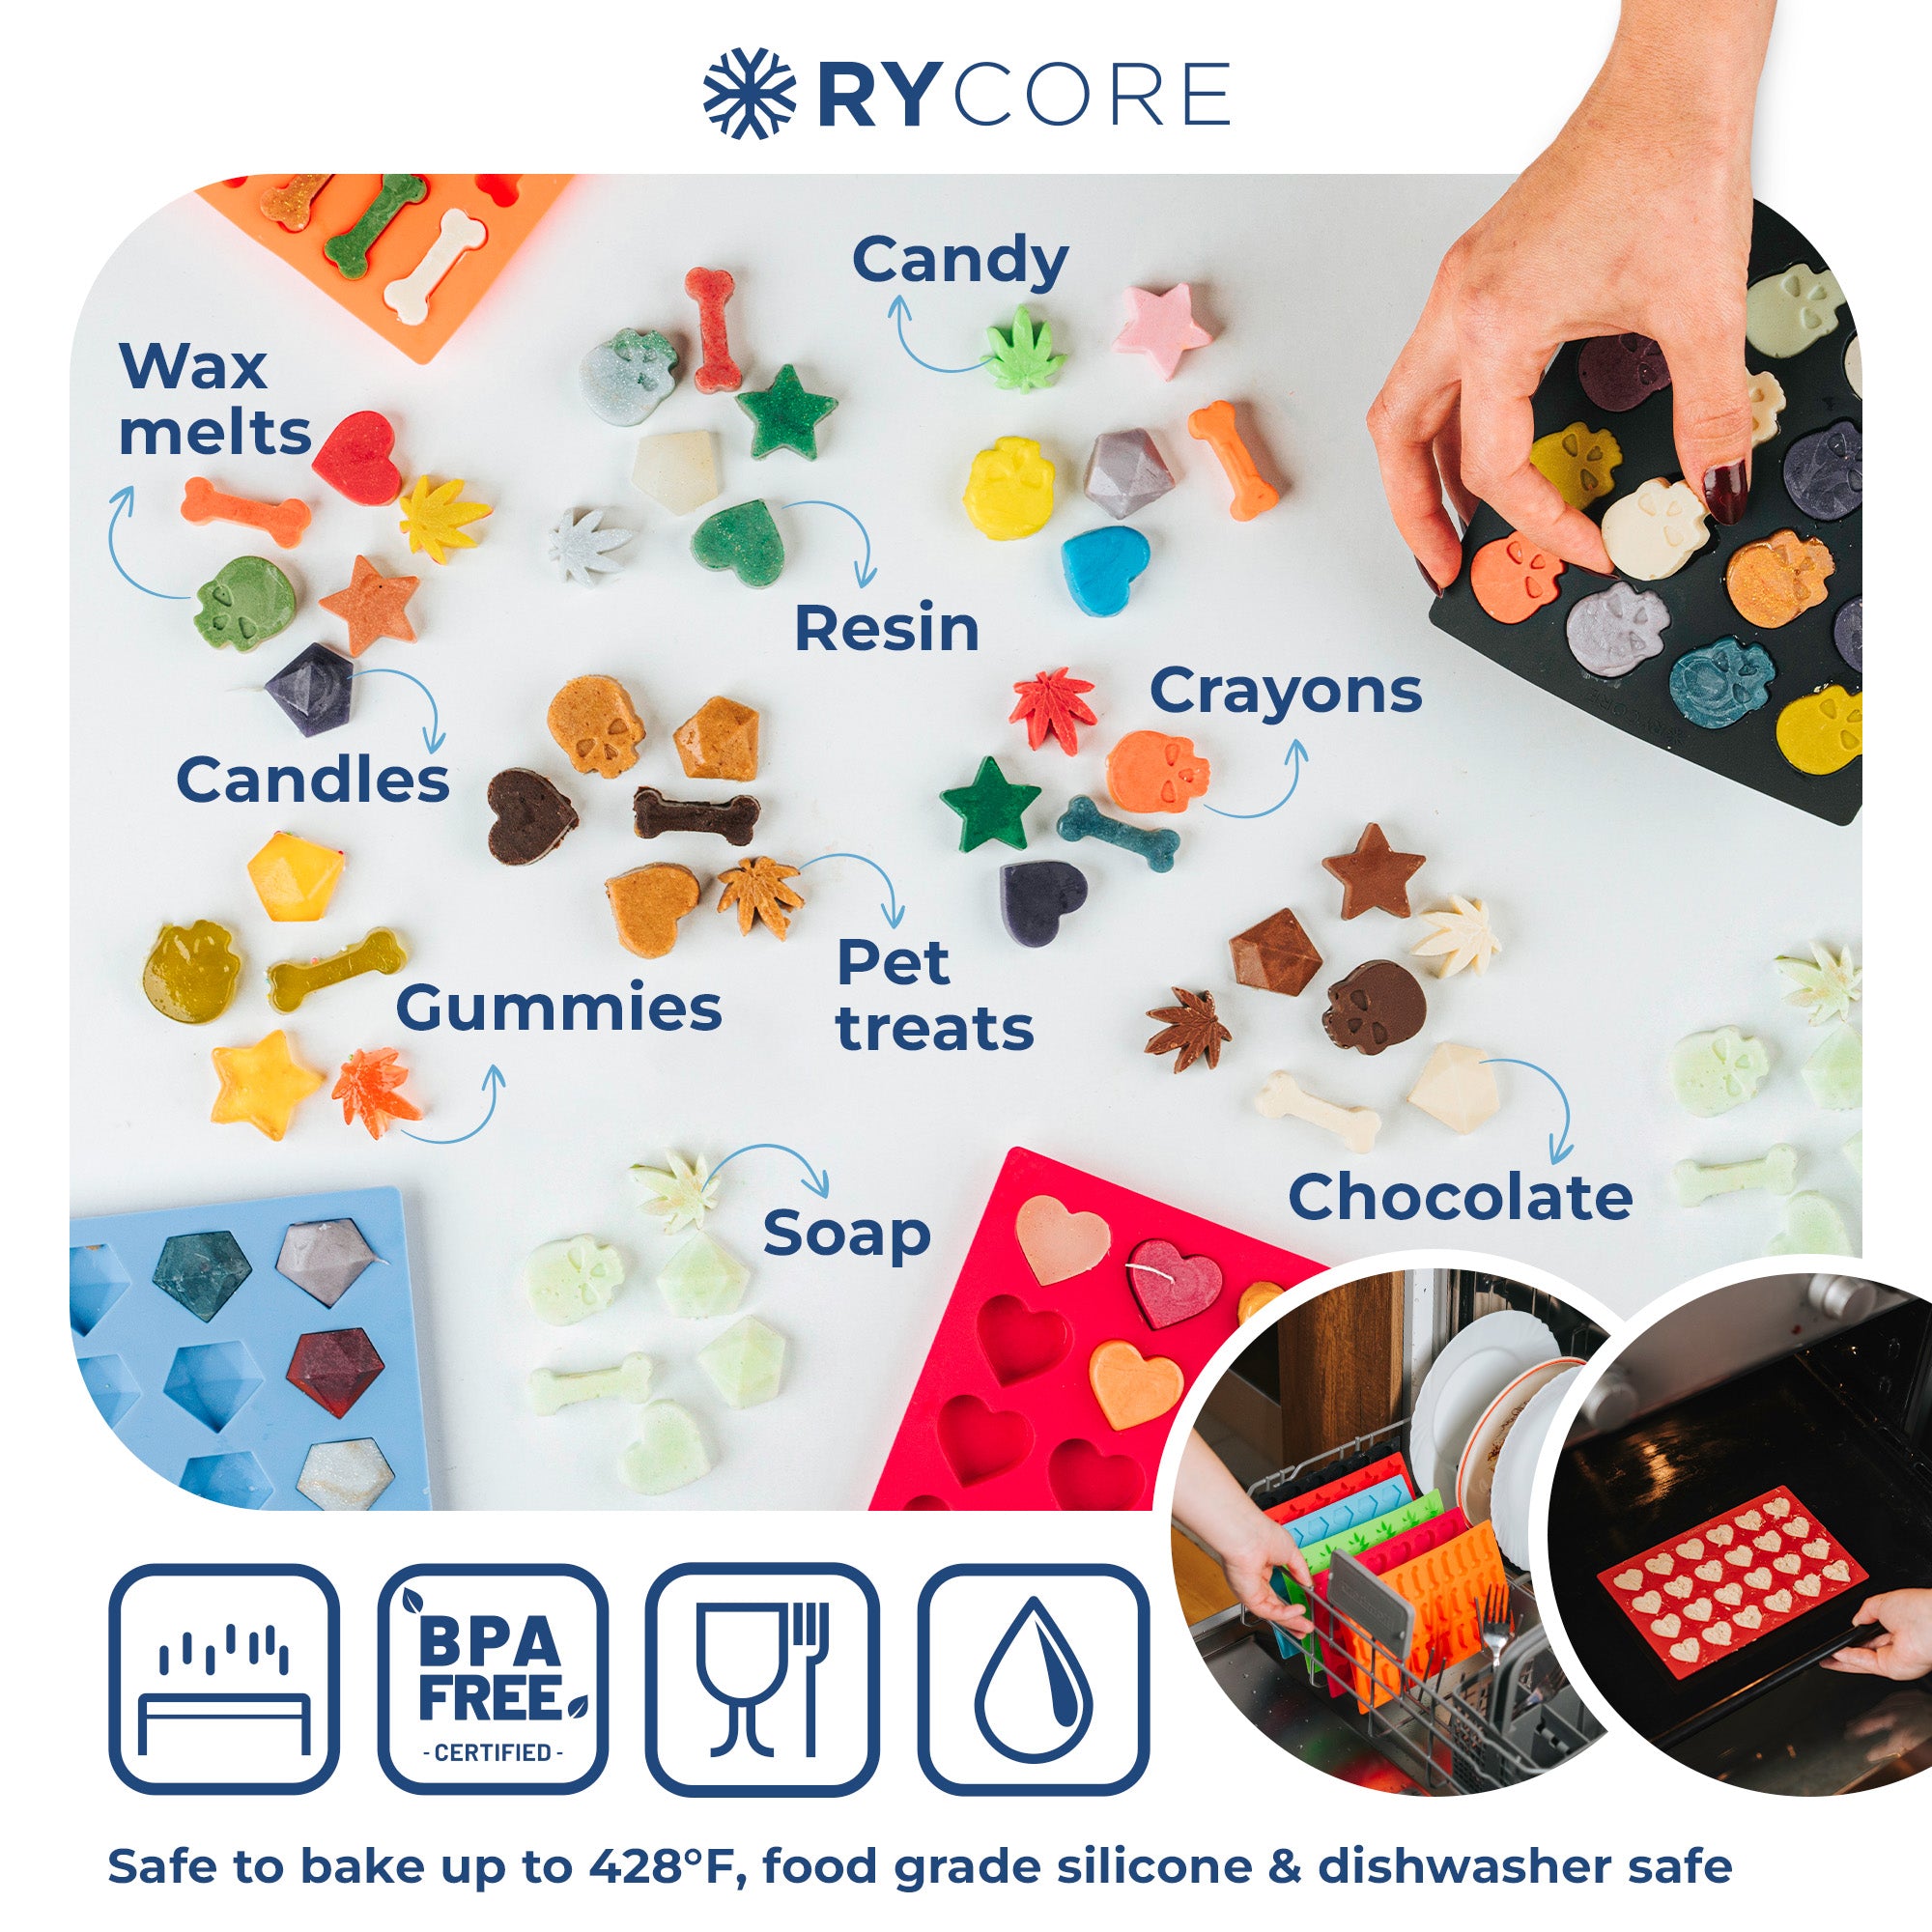 RYCORE Diamond Silicone Mold for Crafting Chocolates, Candies & Luxurious Desserts